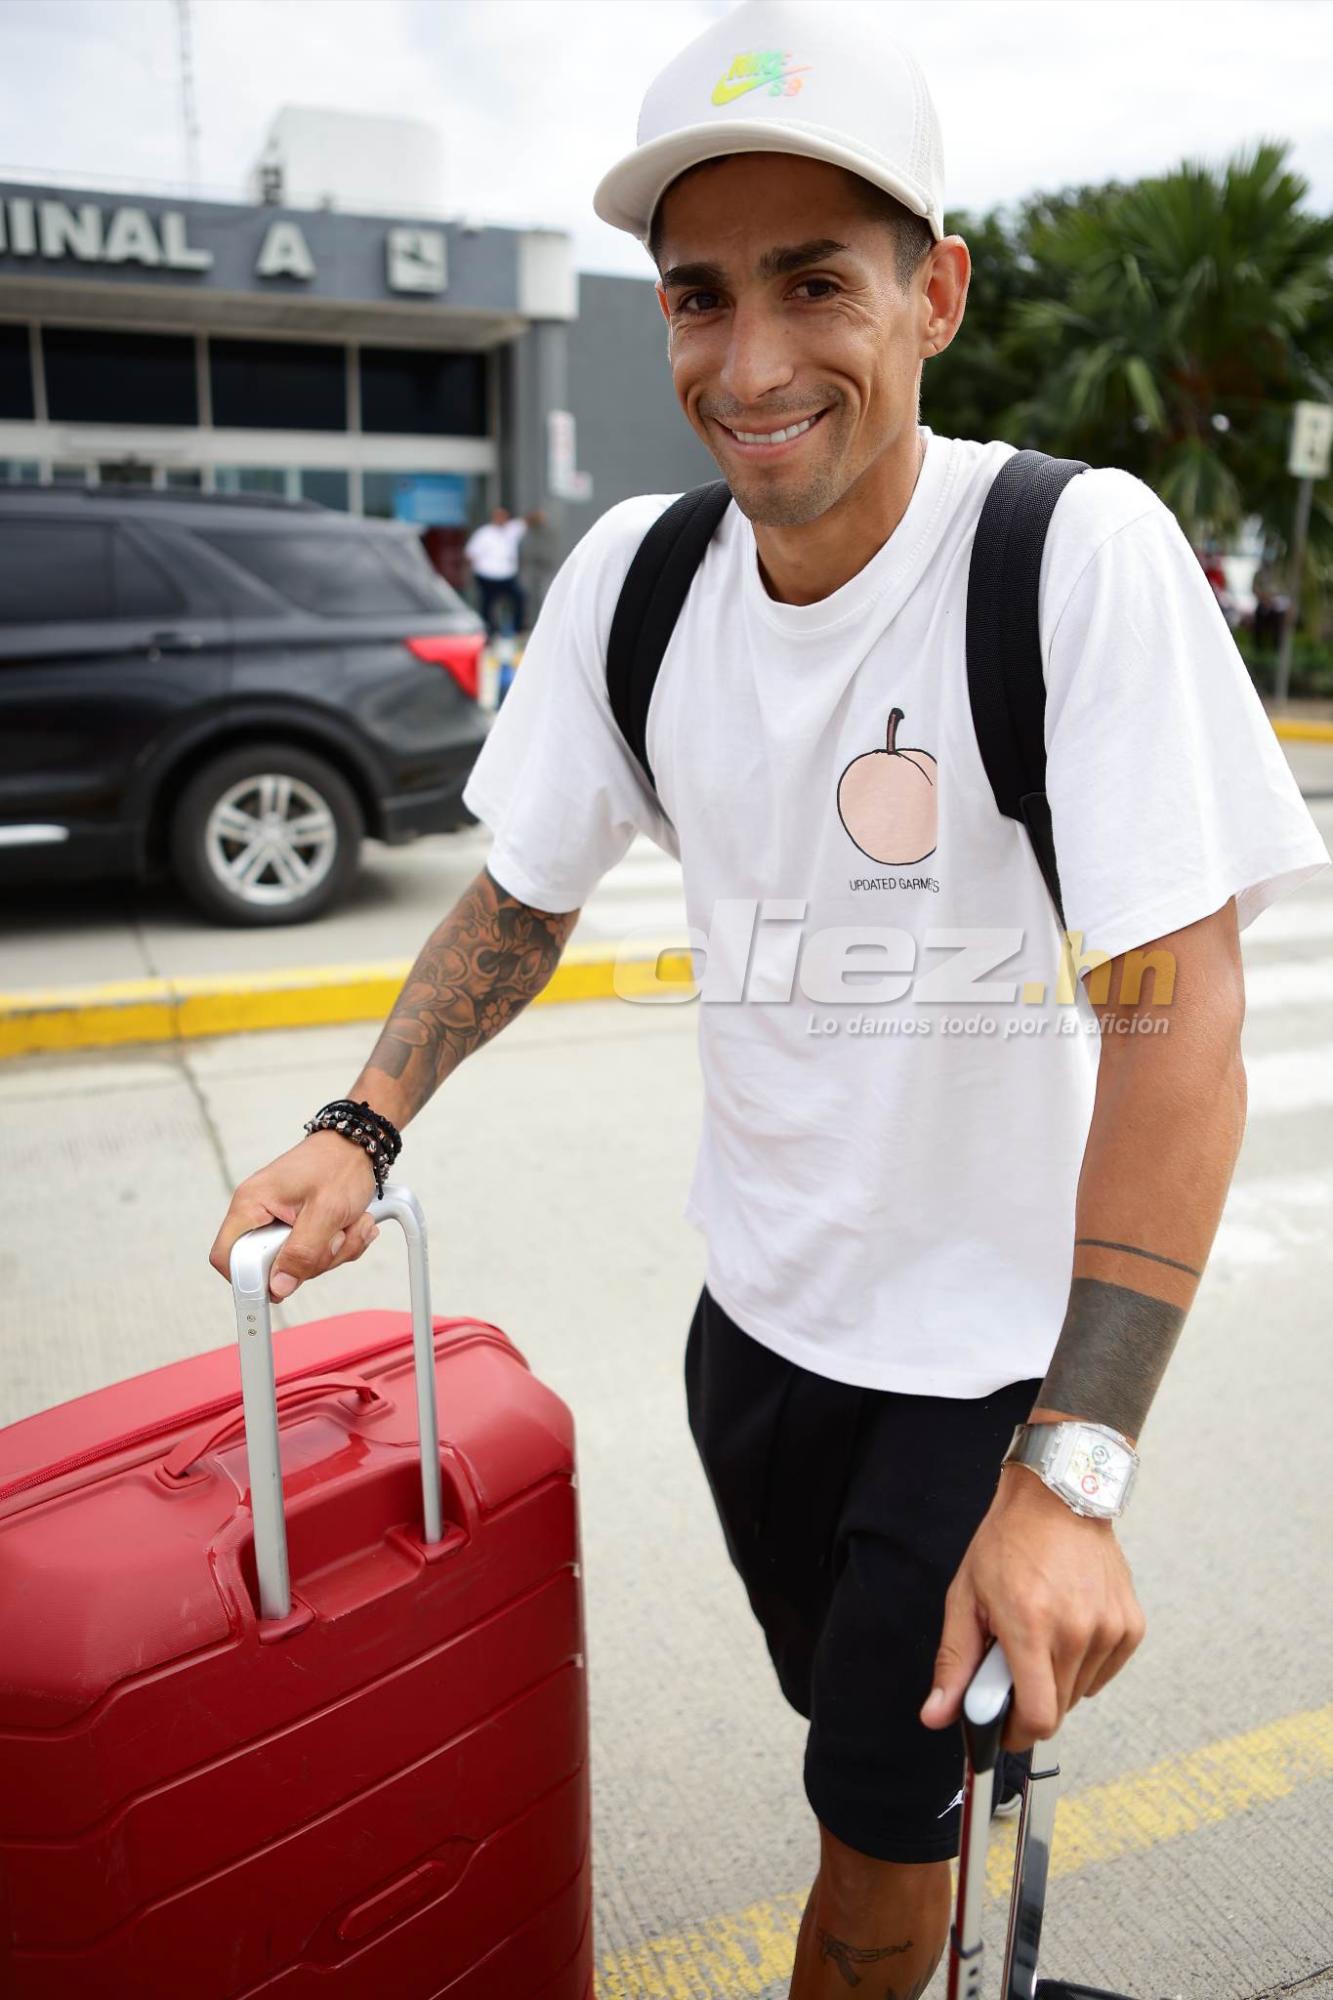 Juan Vieyra arrived restricted to issuing words to the media as he was already a Real España player.  PHOTO: Yoseph Amaya